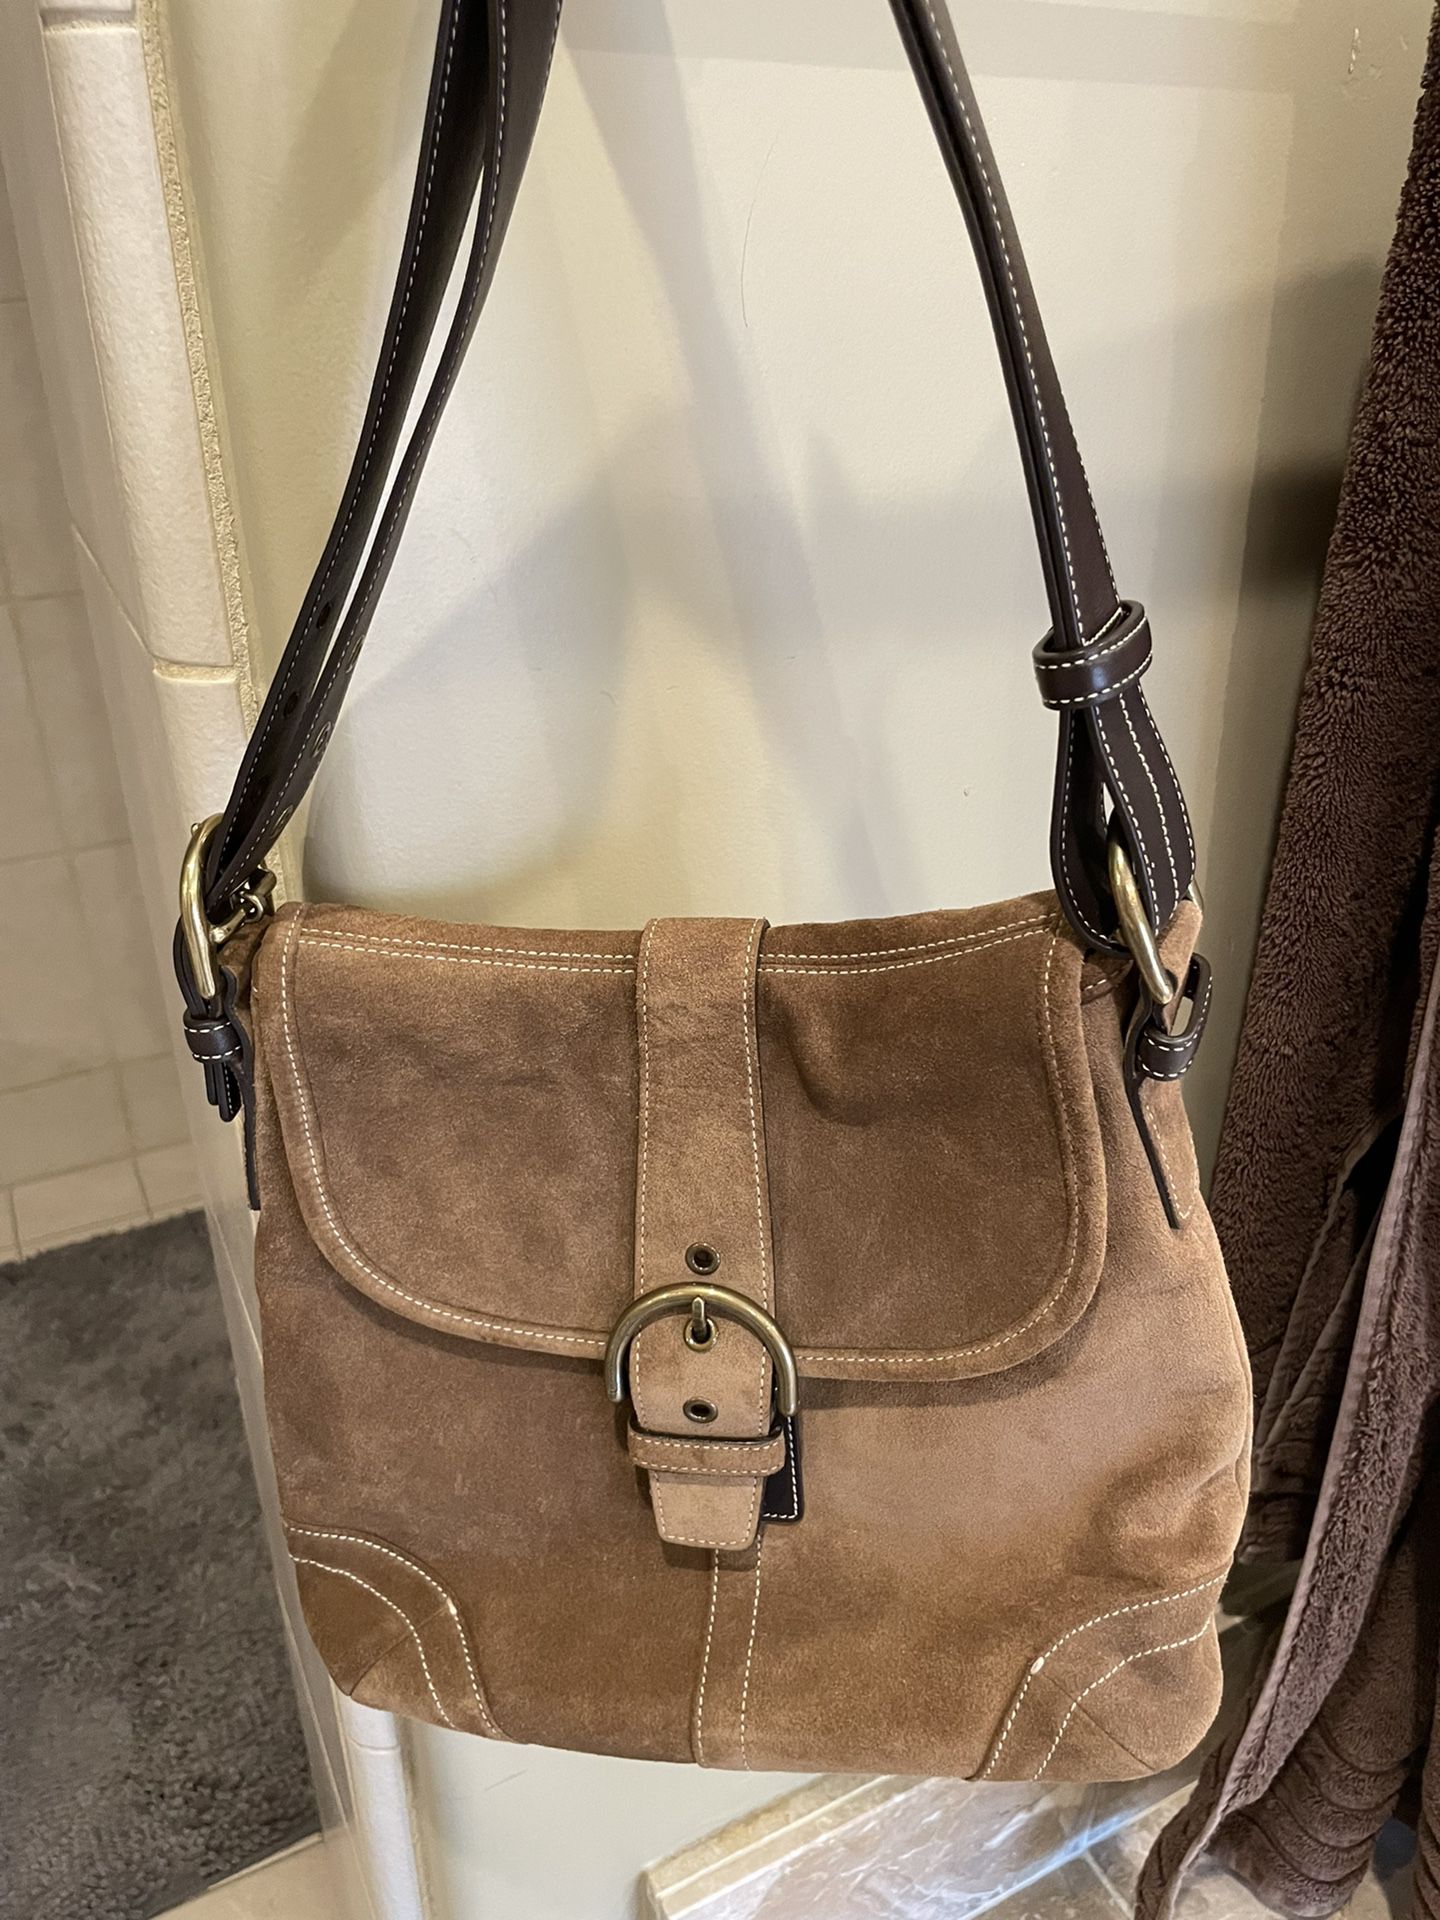 Brown Suede Coach Bag Perfect Condition 